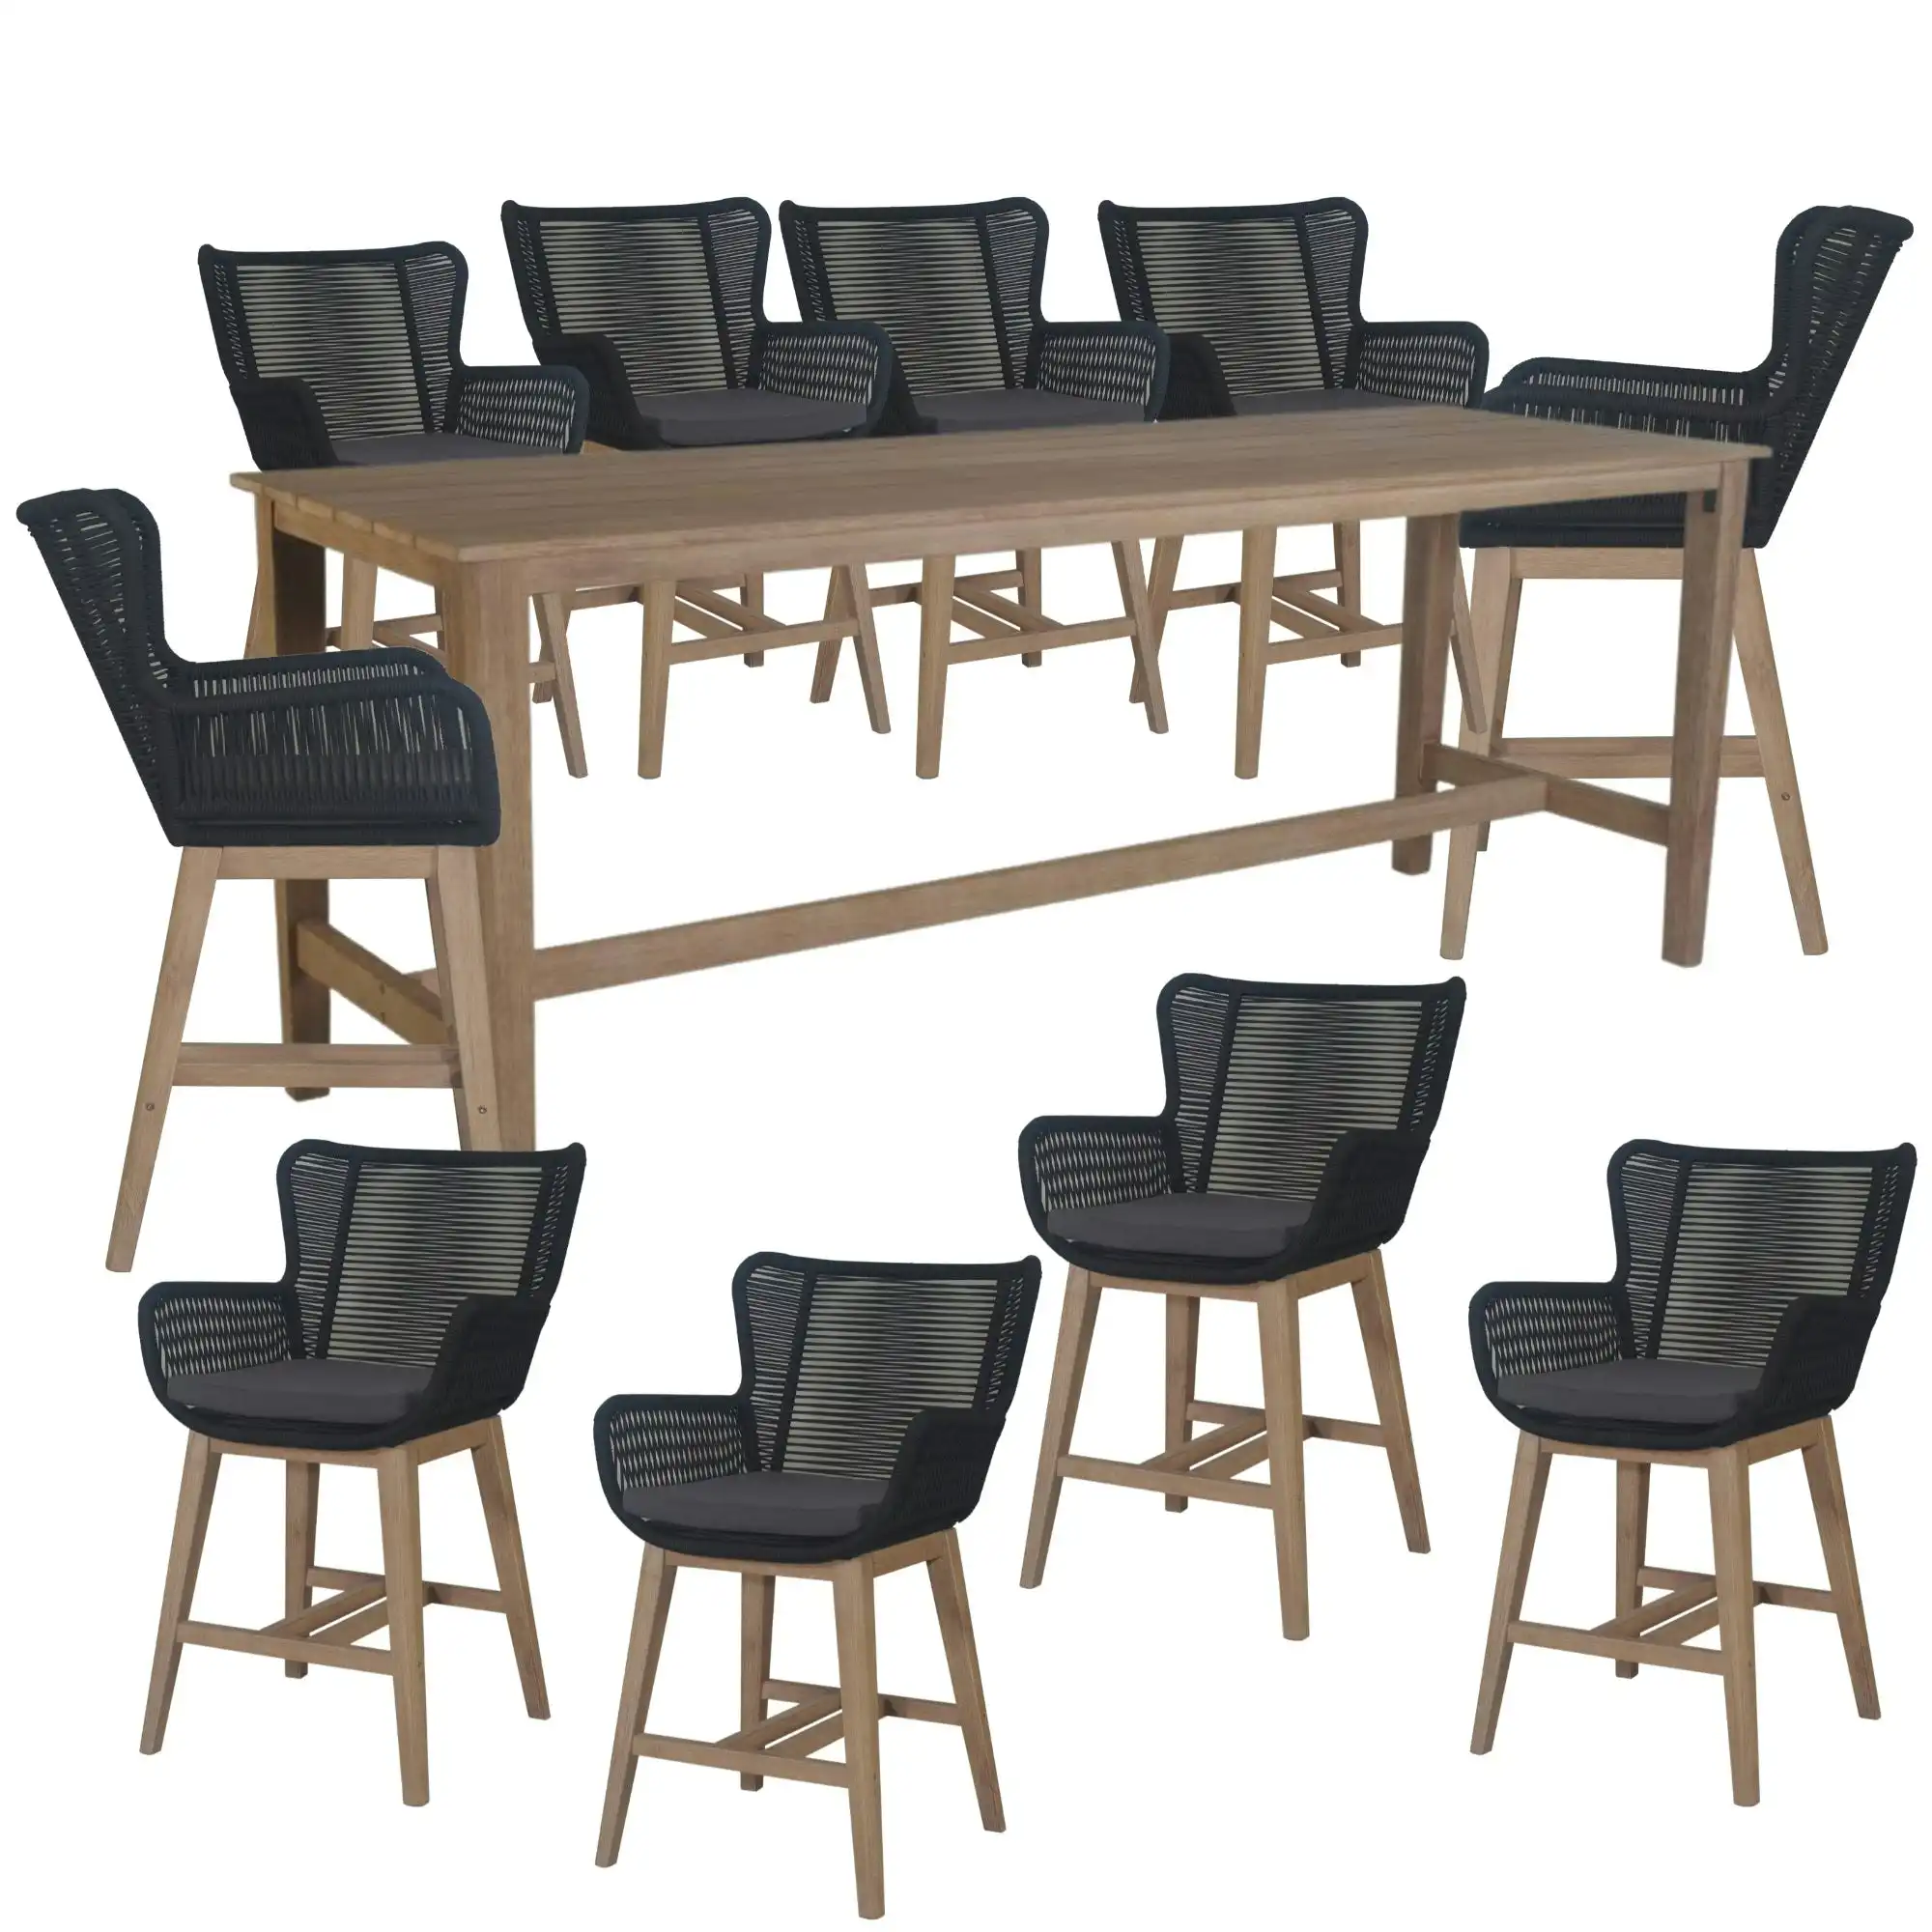 Stud 11pc Outdoor High Bar Dining Table Set